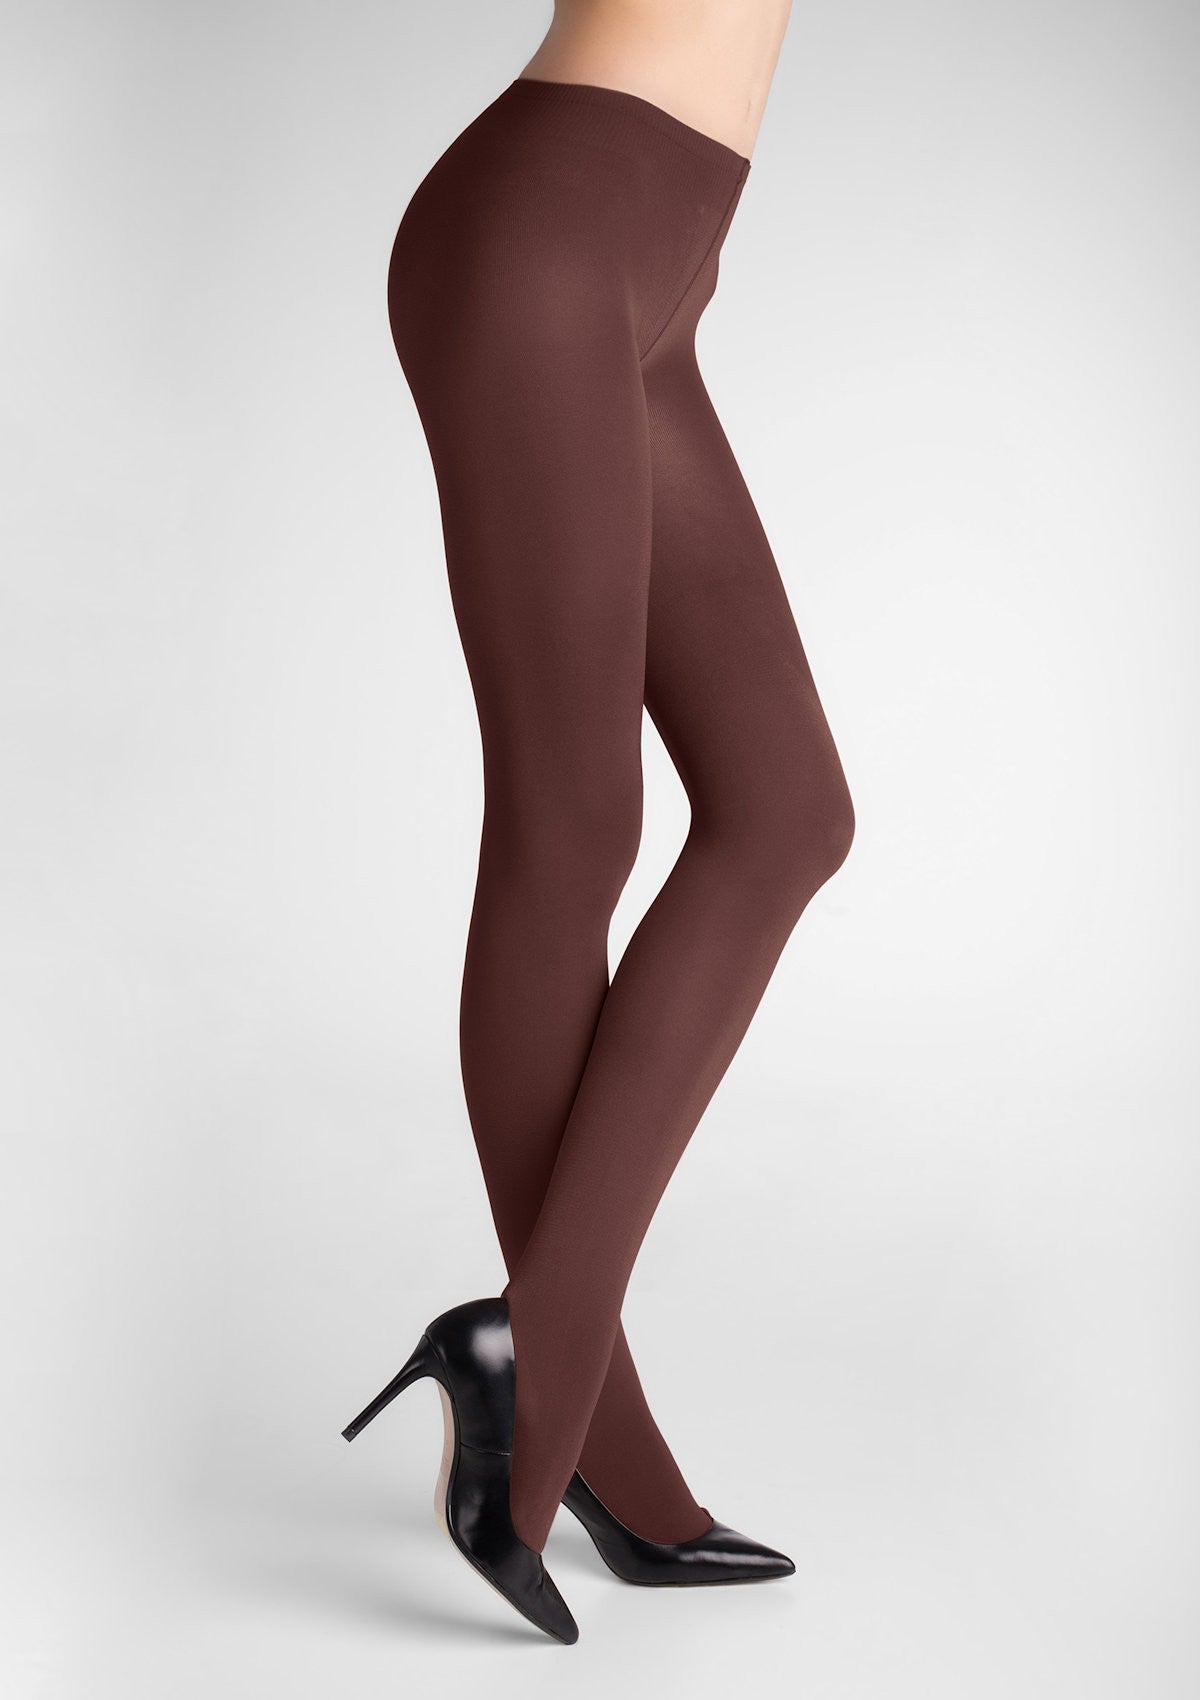 Tights for Women Cappucino Brown Shimmer Shiny Glossy Tights 40 Denier SML  Fiore 